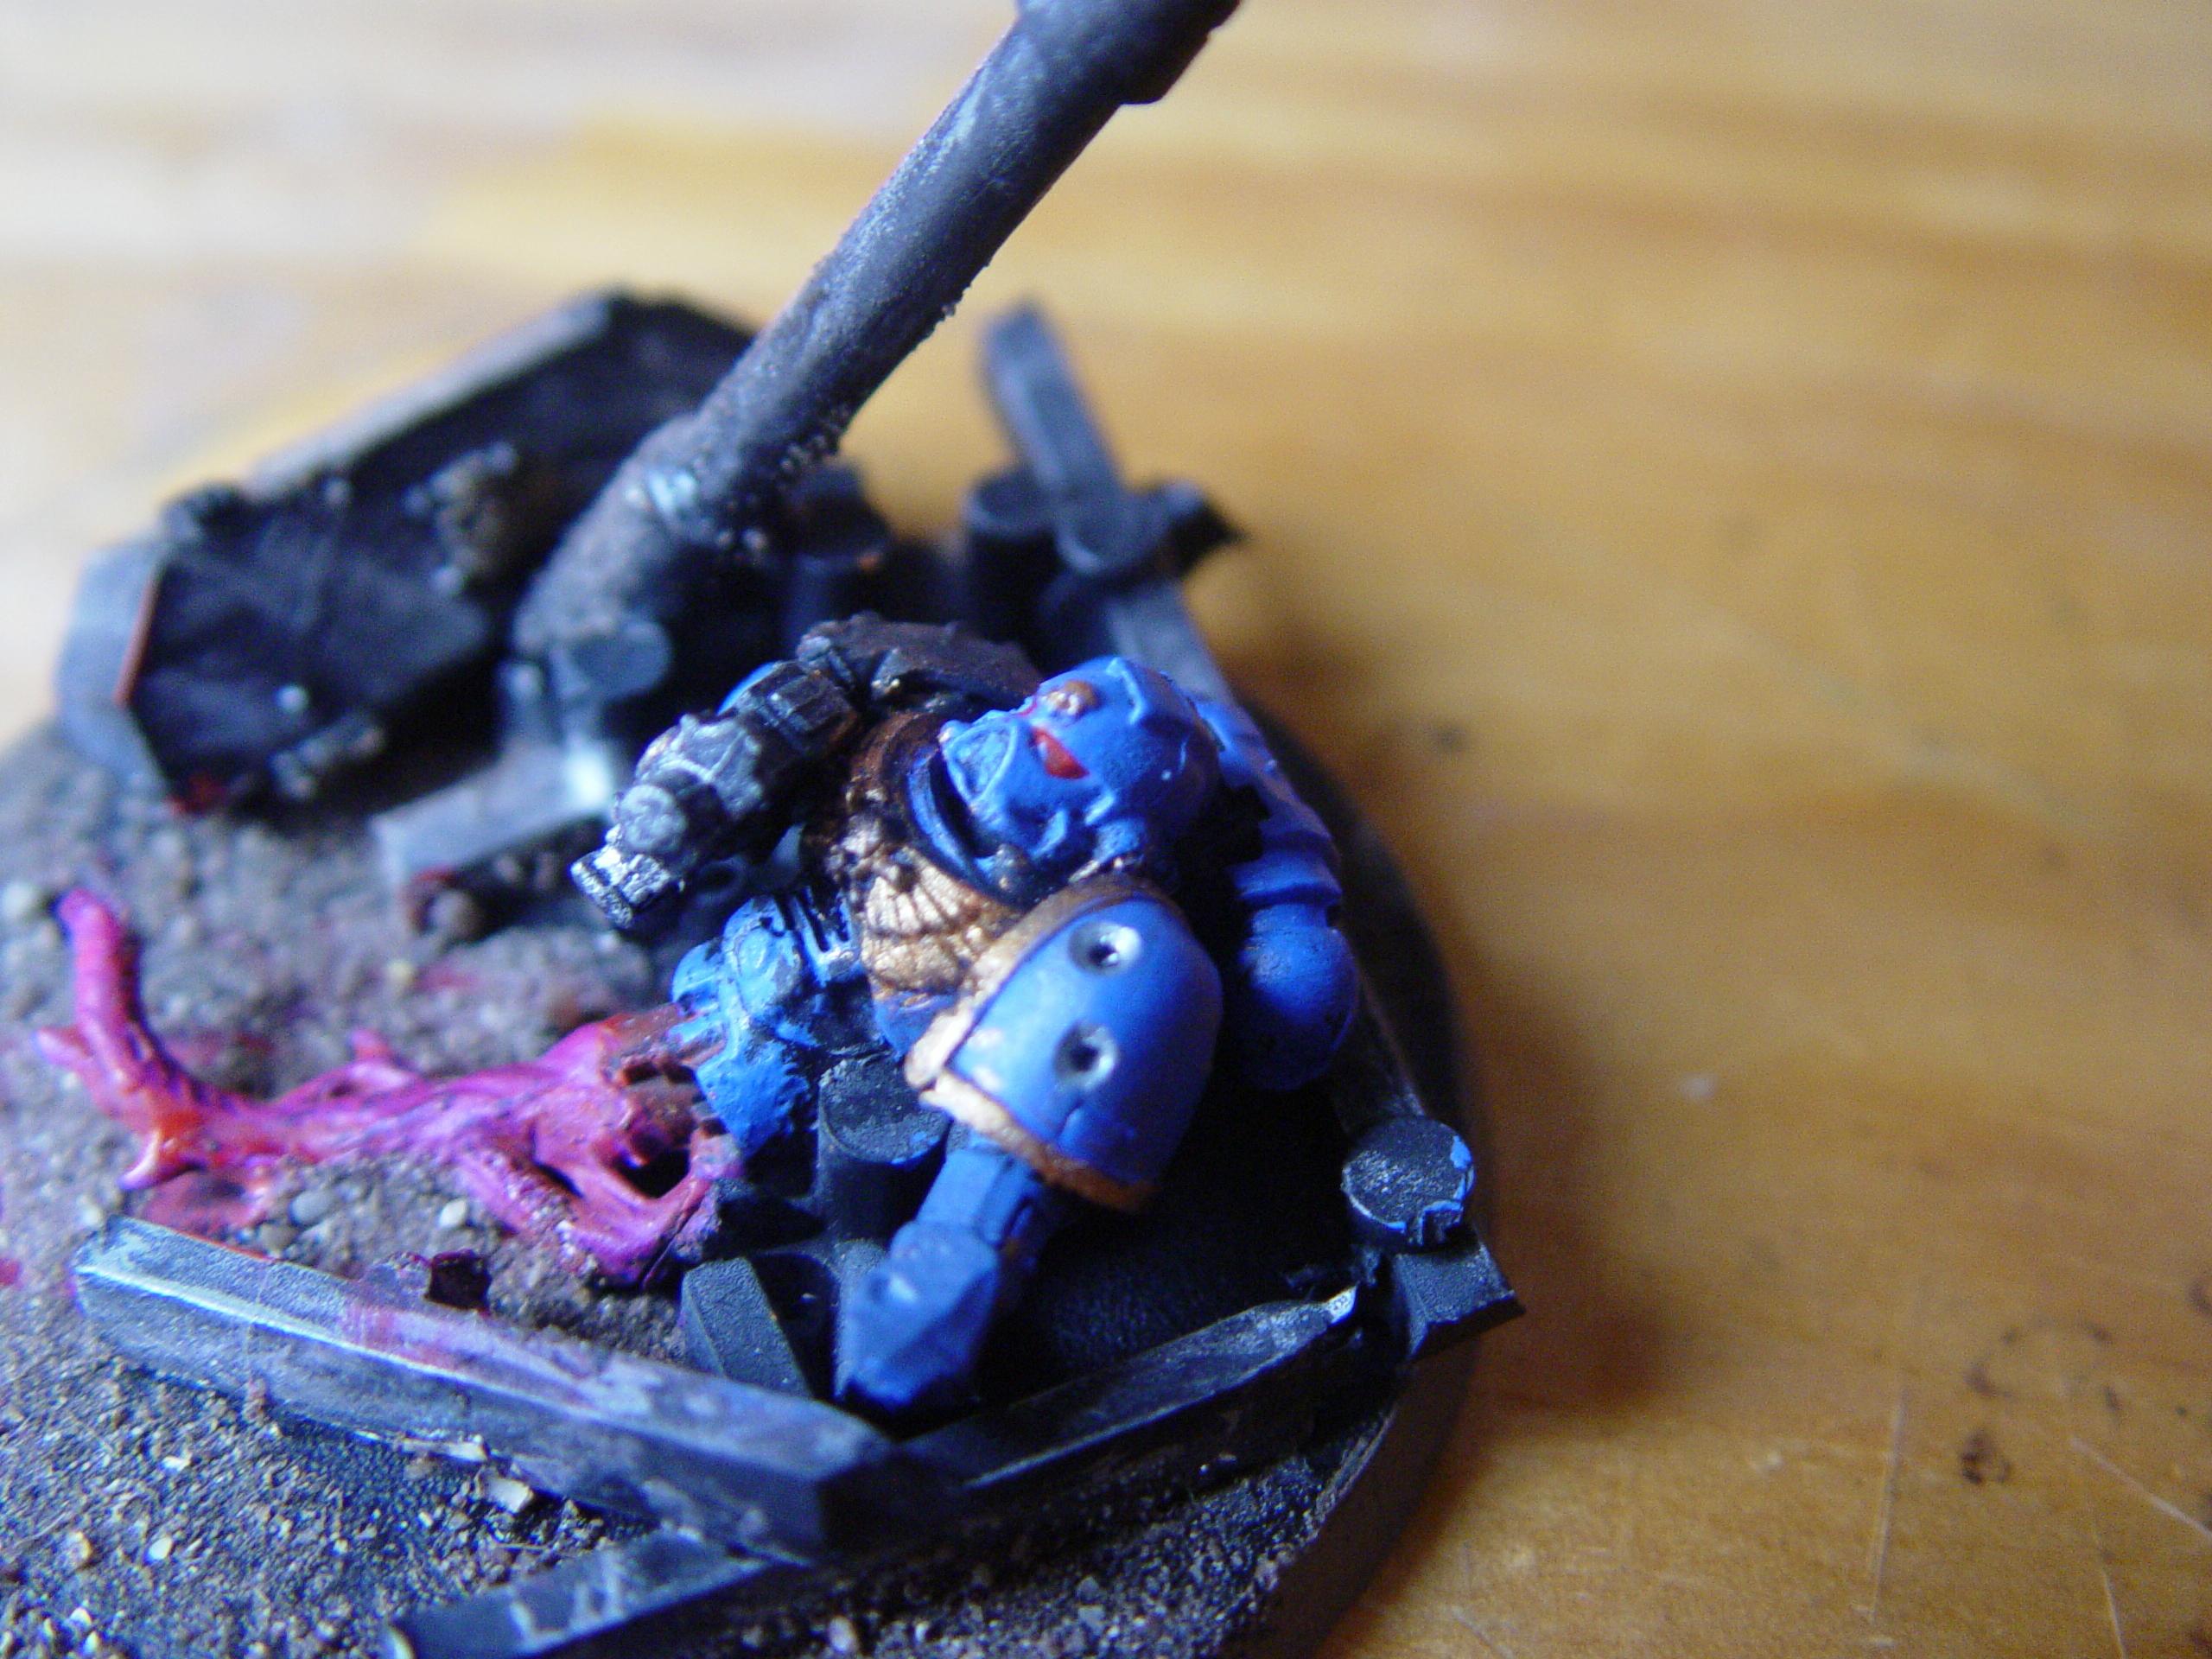 Casualty, Chaos Space Marines, Nurgle, Objective Marker